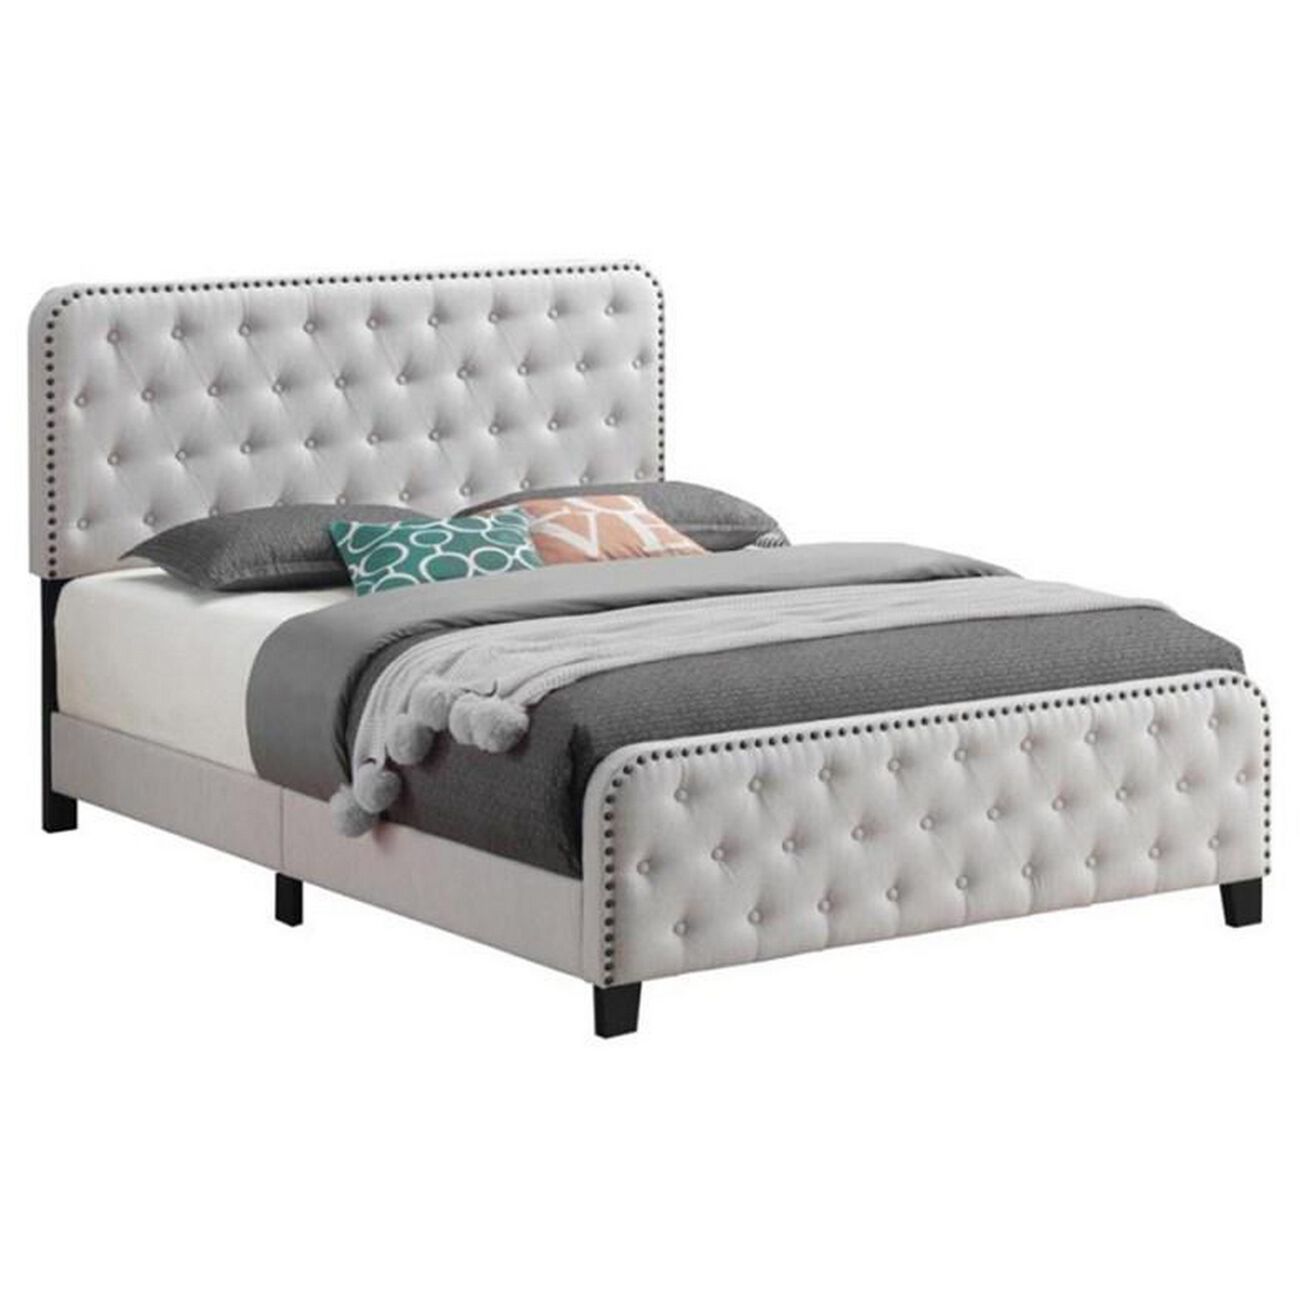 Tufted Queen Fabric Bed with Nailhead Trim, Beige